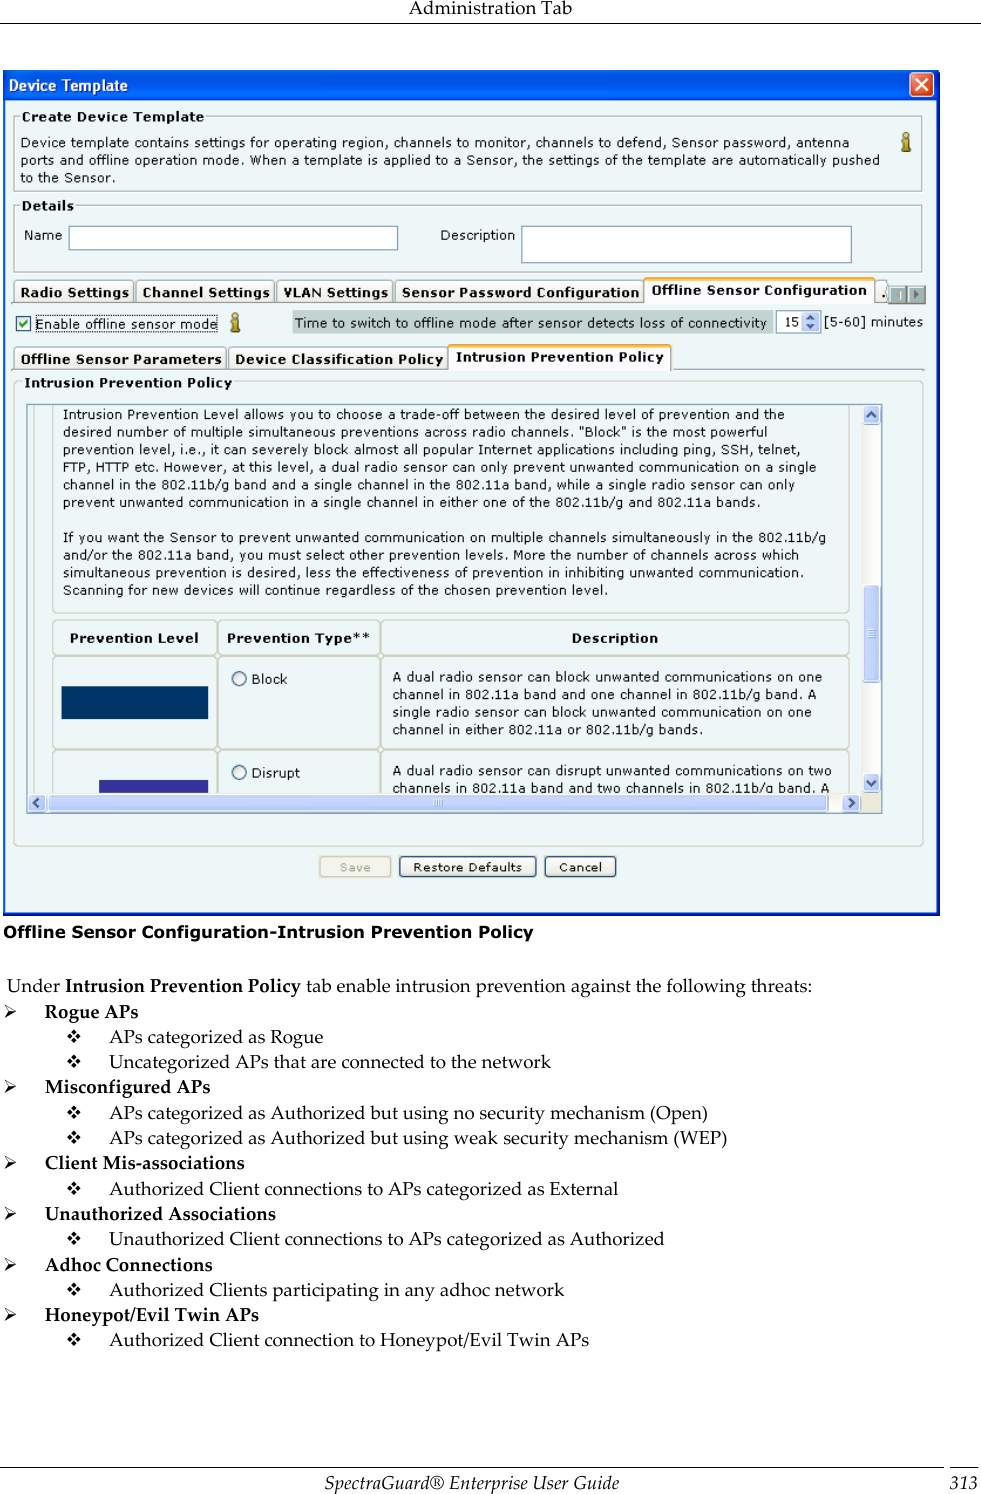 Administration Tab SpectraGuard®  Enterprise User Guide 313  Offline Sensor Configuration-Intrusion Prevention Policy    Under Intrusion Prevention Policy tab enable intrusion prevention against the following threats:        Rogue APs        APs categorized as Rogue        Uncategorized APs that are connected to the network        Misconfigured APs        APs categorized as Authorized but using no security mechanism (Open)        APs categorized as Authorized but using weak security mechanism (WEP)        Client Mis-associations        Authorized Client connections to APs categorized as External        Unauthorized Associations        Unauthorized Client connections to APs categorized as Authorized        Adhoc Connections        Authorized Clients participating in any adhoc network        Honeypot/Evil Twin APs        Authorized Client connection to Honeypot/Evil Twin APs 